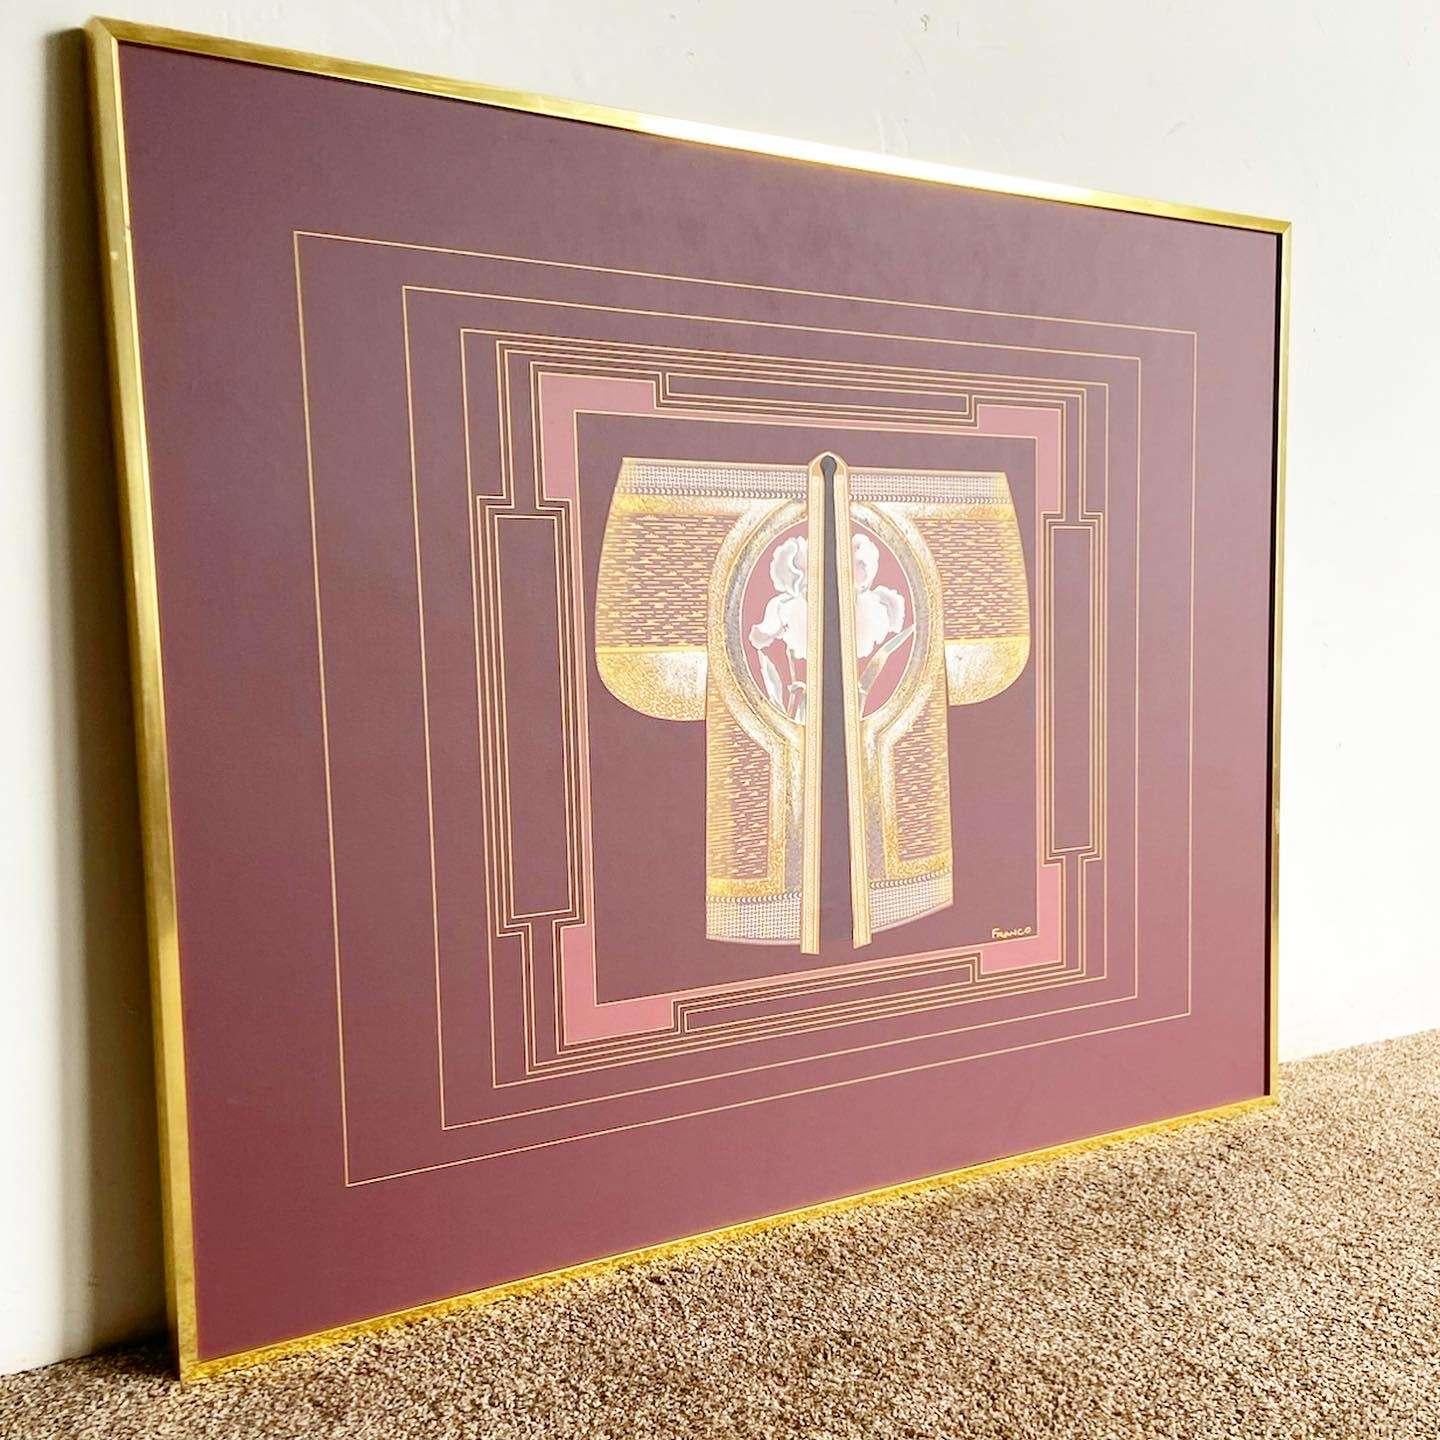 American Art Deco Purple Pink and Gold Signed Painting in Gold Frame For Sale